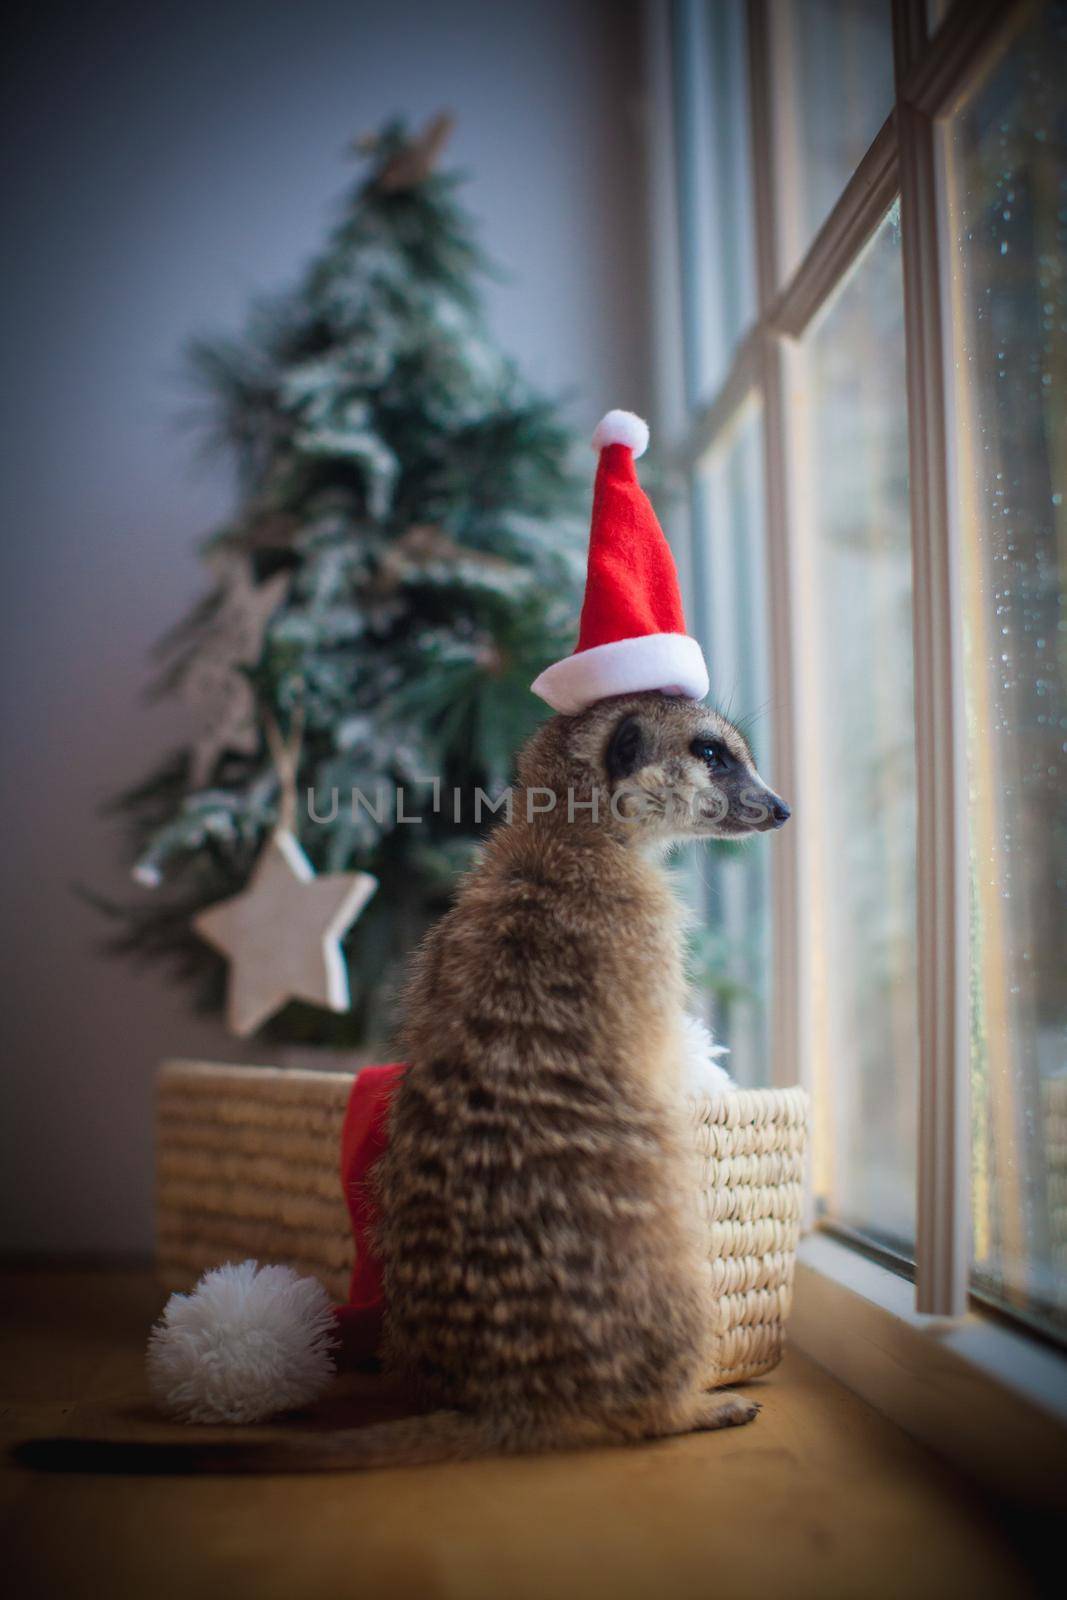 The meerkat or suricate, Suricata suricatta, in decorated room with Christmass tree in front of window